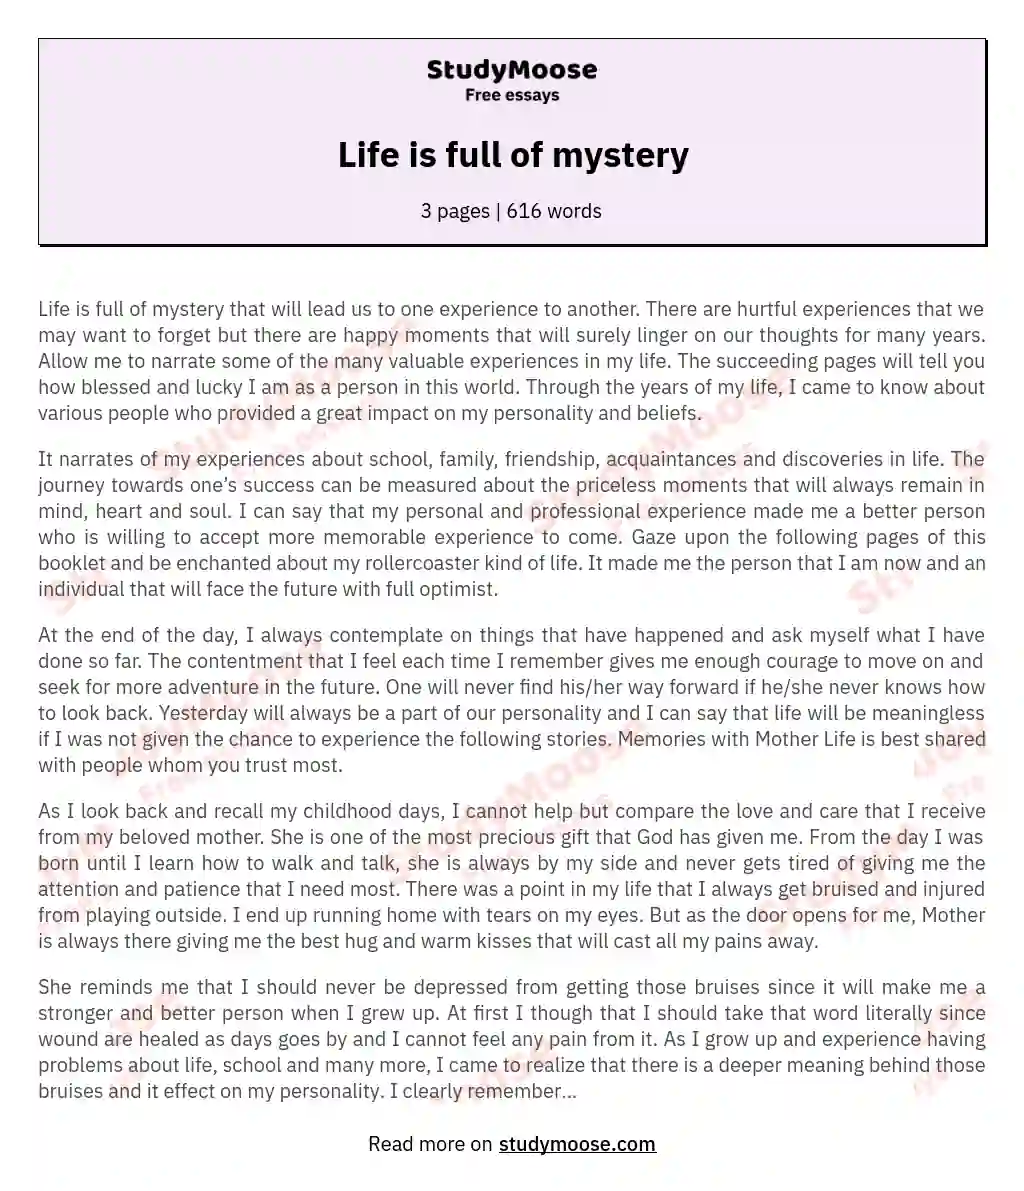 Life is full of mystery essay